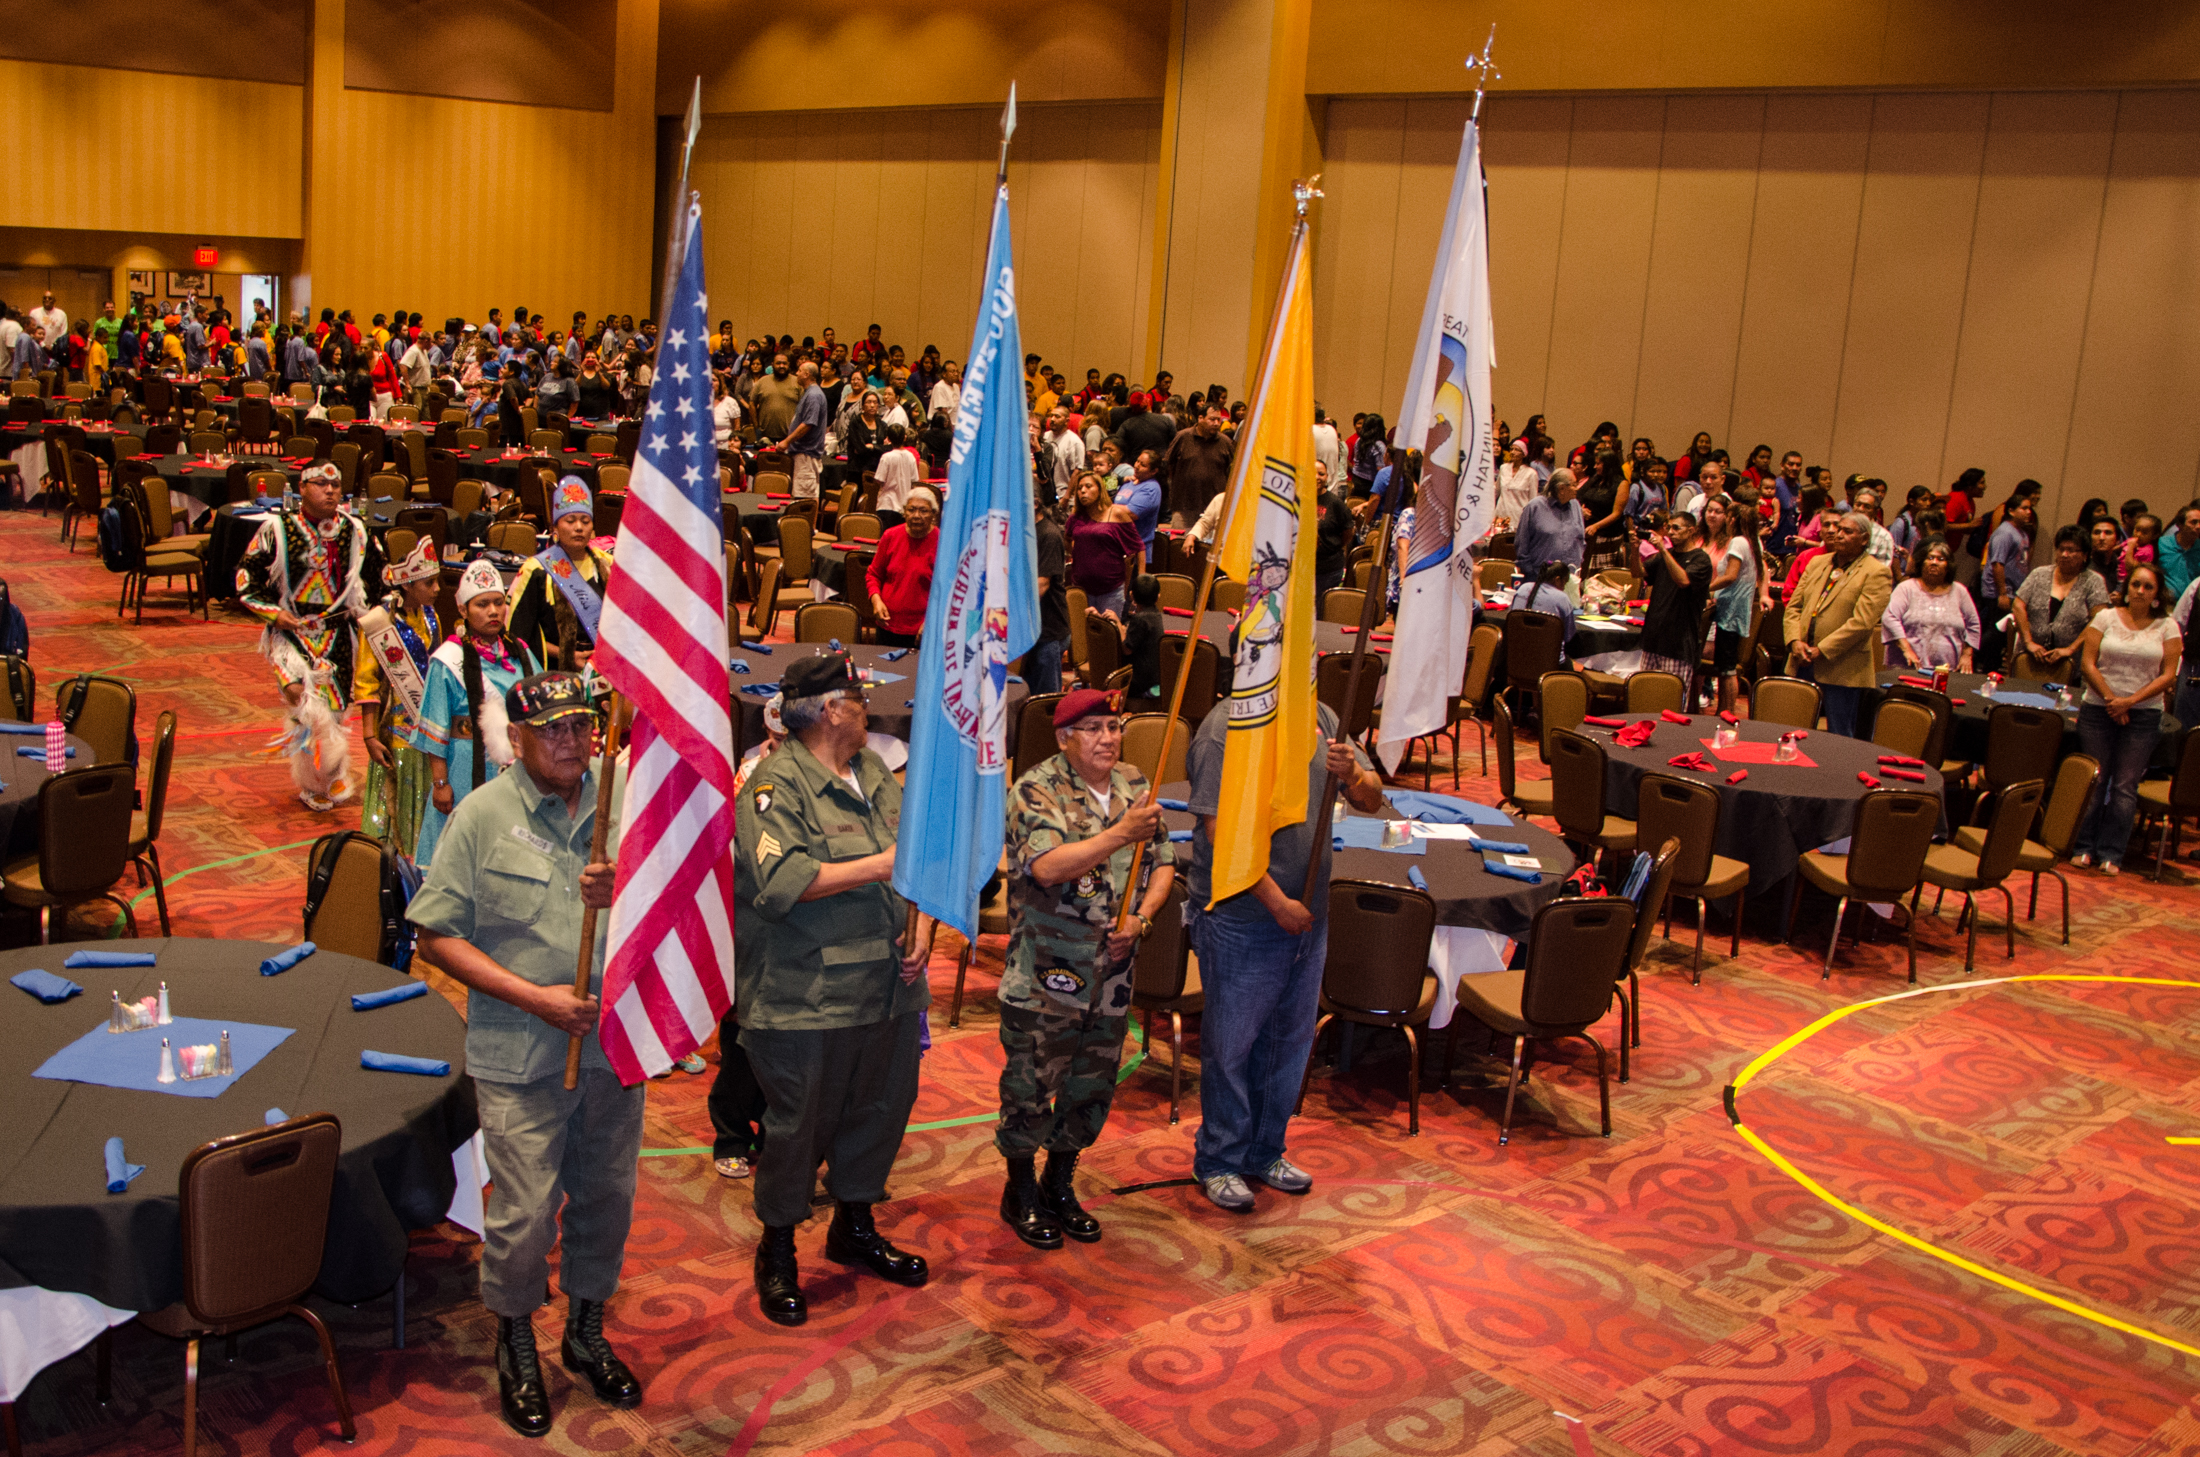 Representatives from each tribe’s veterans group carry the tribal and U.S. flags during the Opening Ceremony.